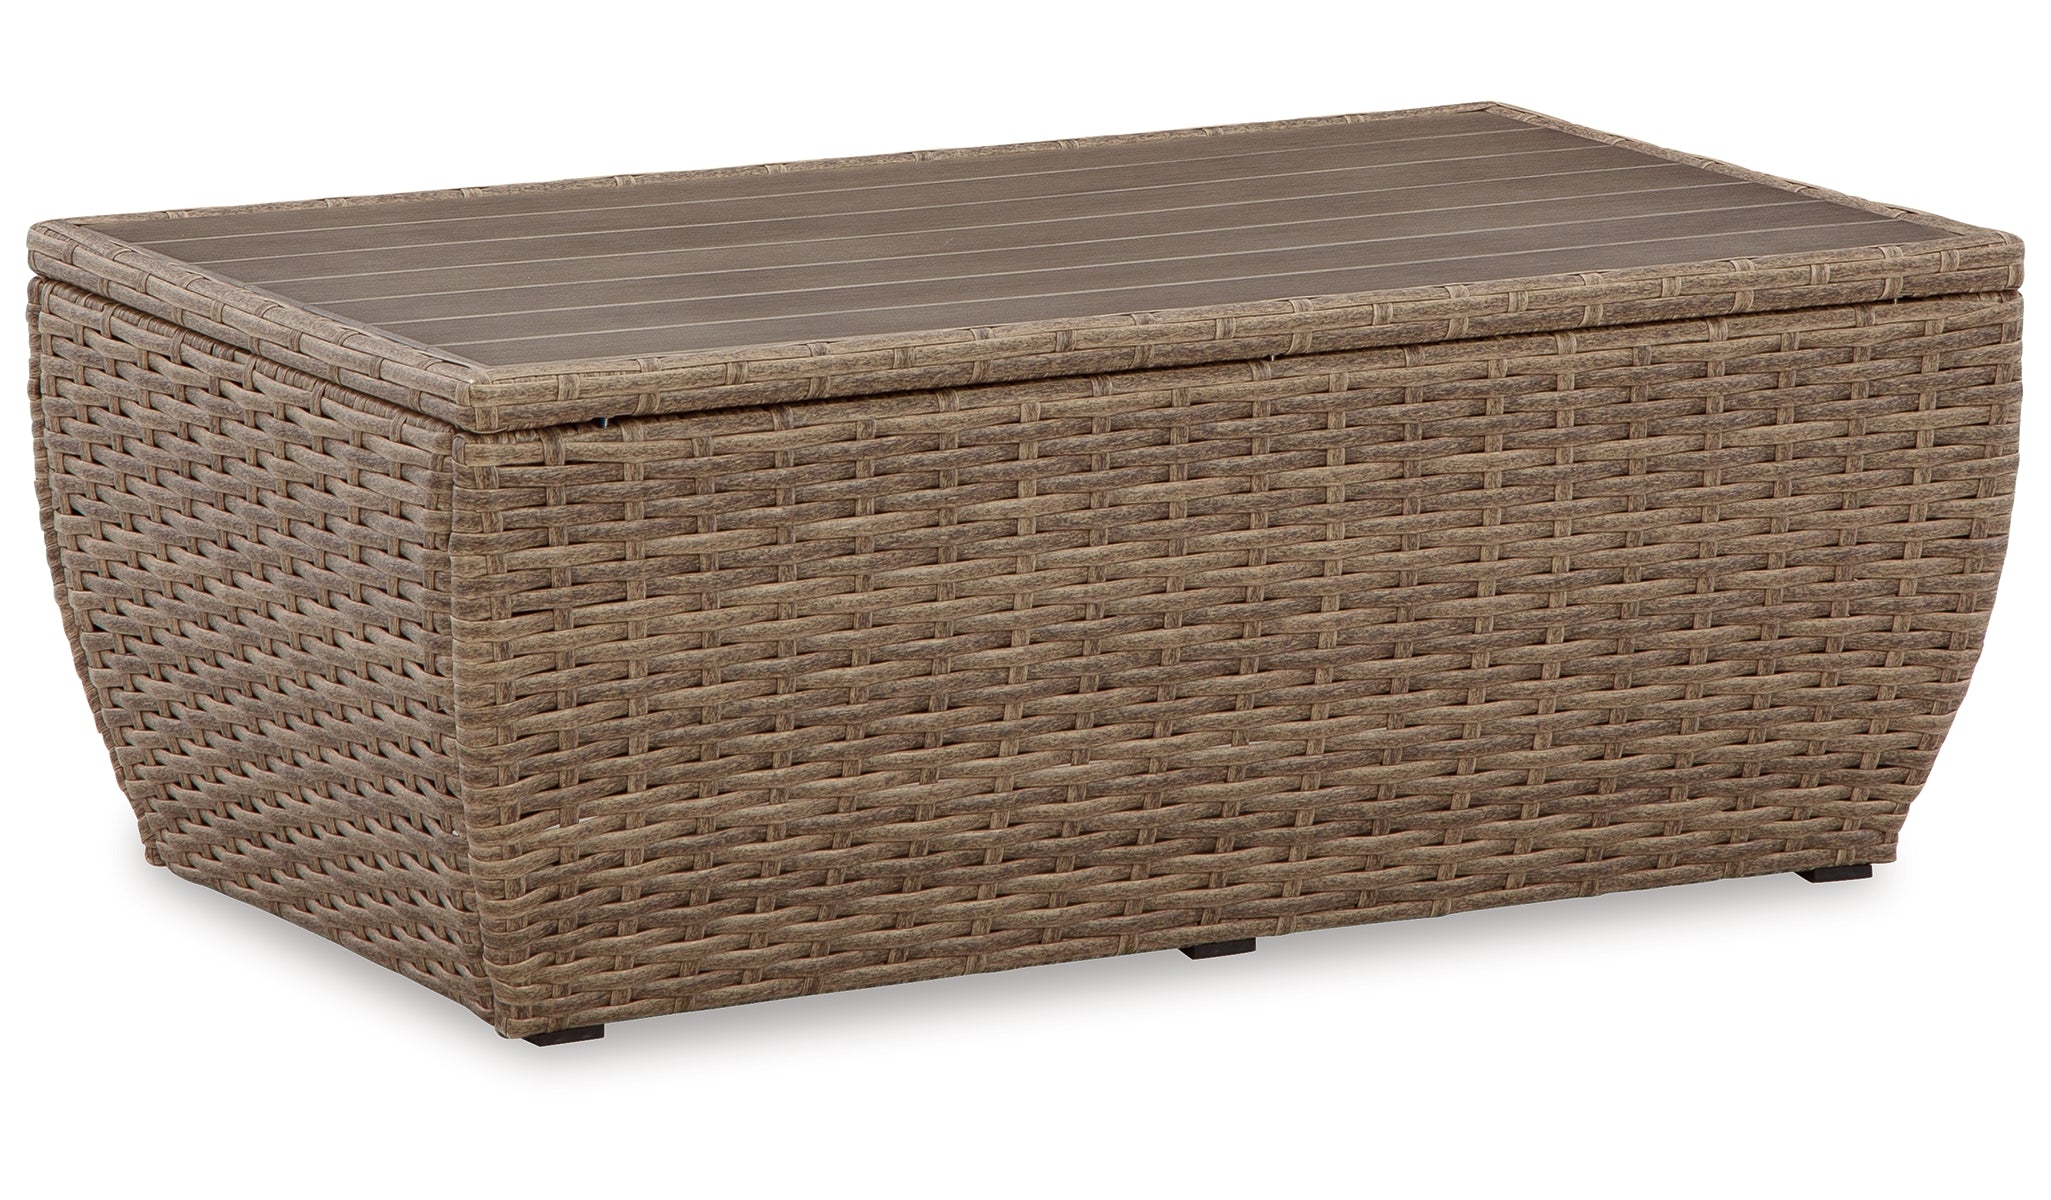 Sandy Bloom Outdoor Coffee Table with 2 End Tables